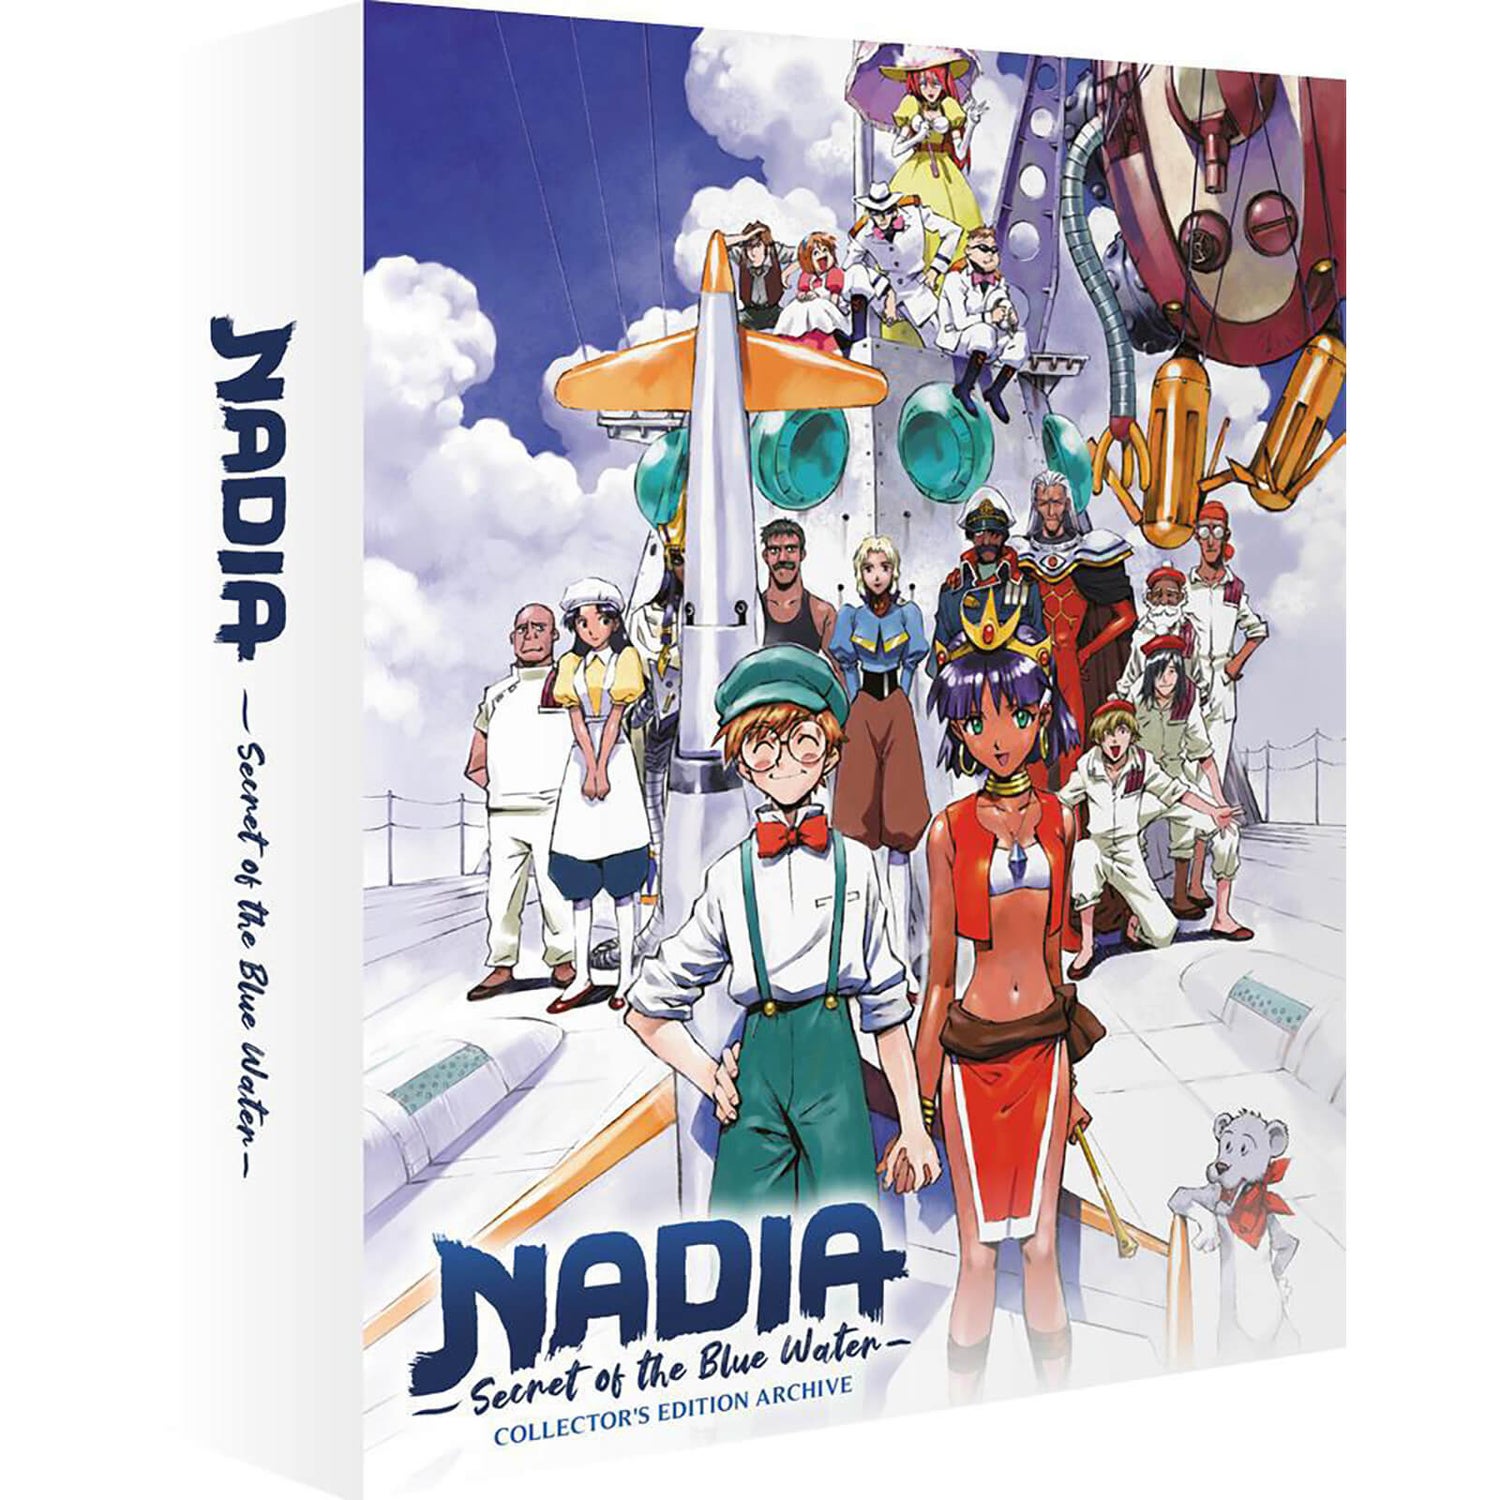 Nadia: The Secret of the Blue Water - 4K Part 1 (Limited Edition with Slipcase)